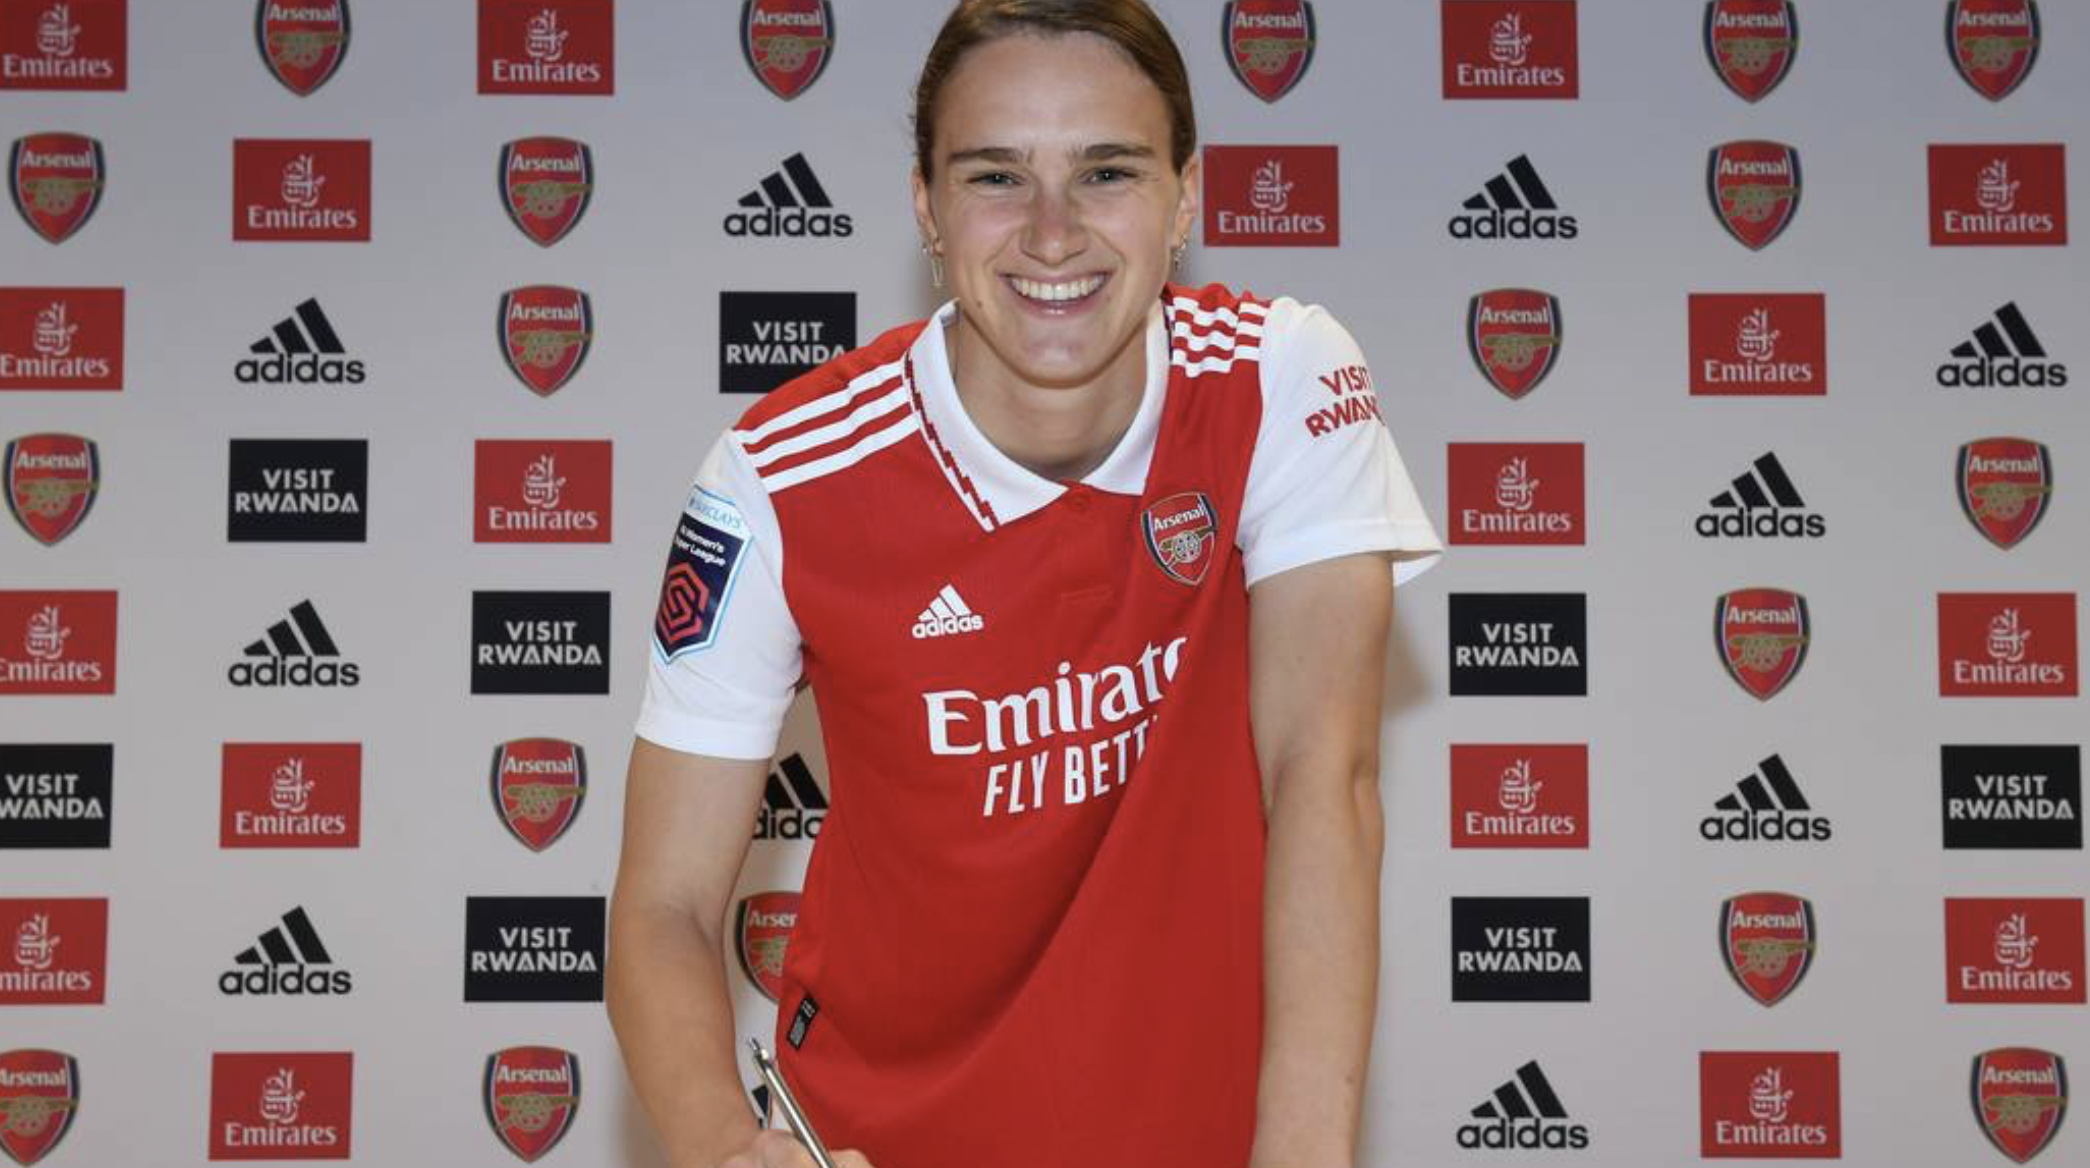 Good news! Viv Miedema signs new deal with Arsenal